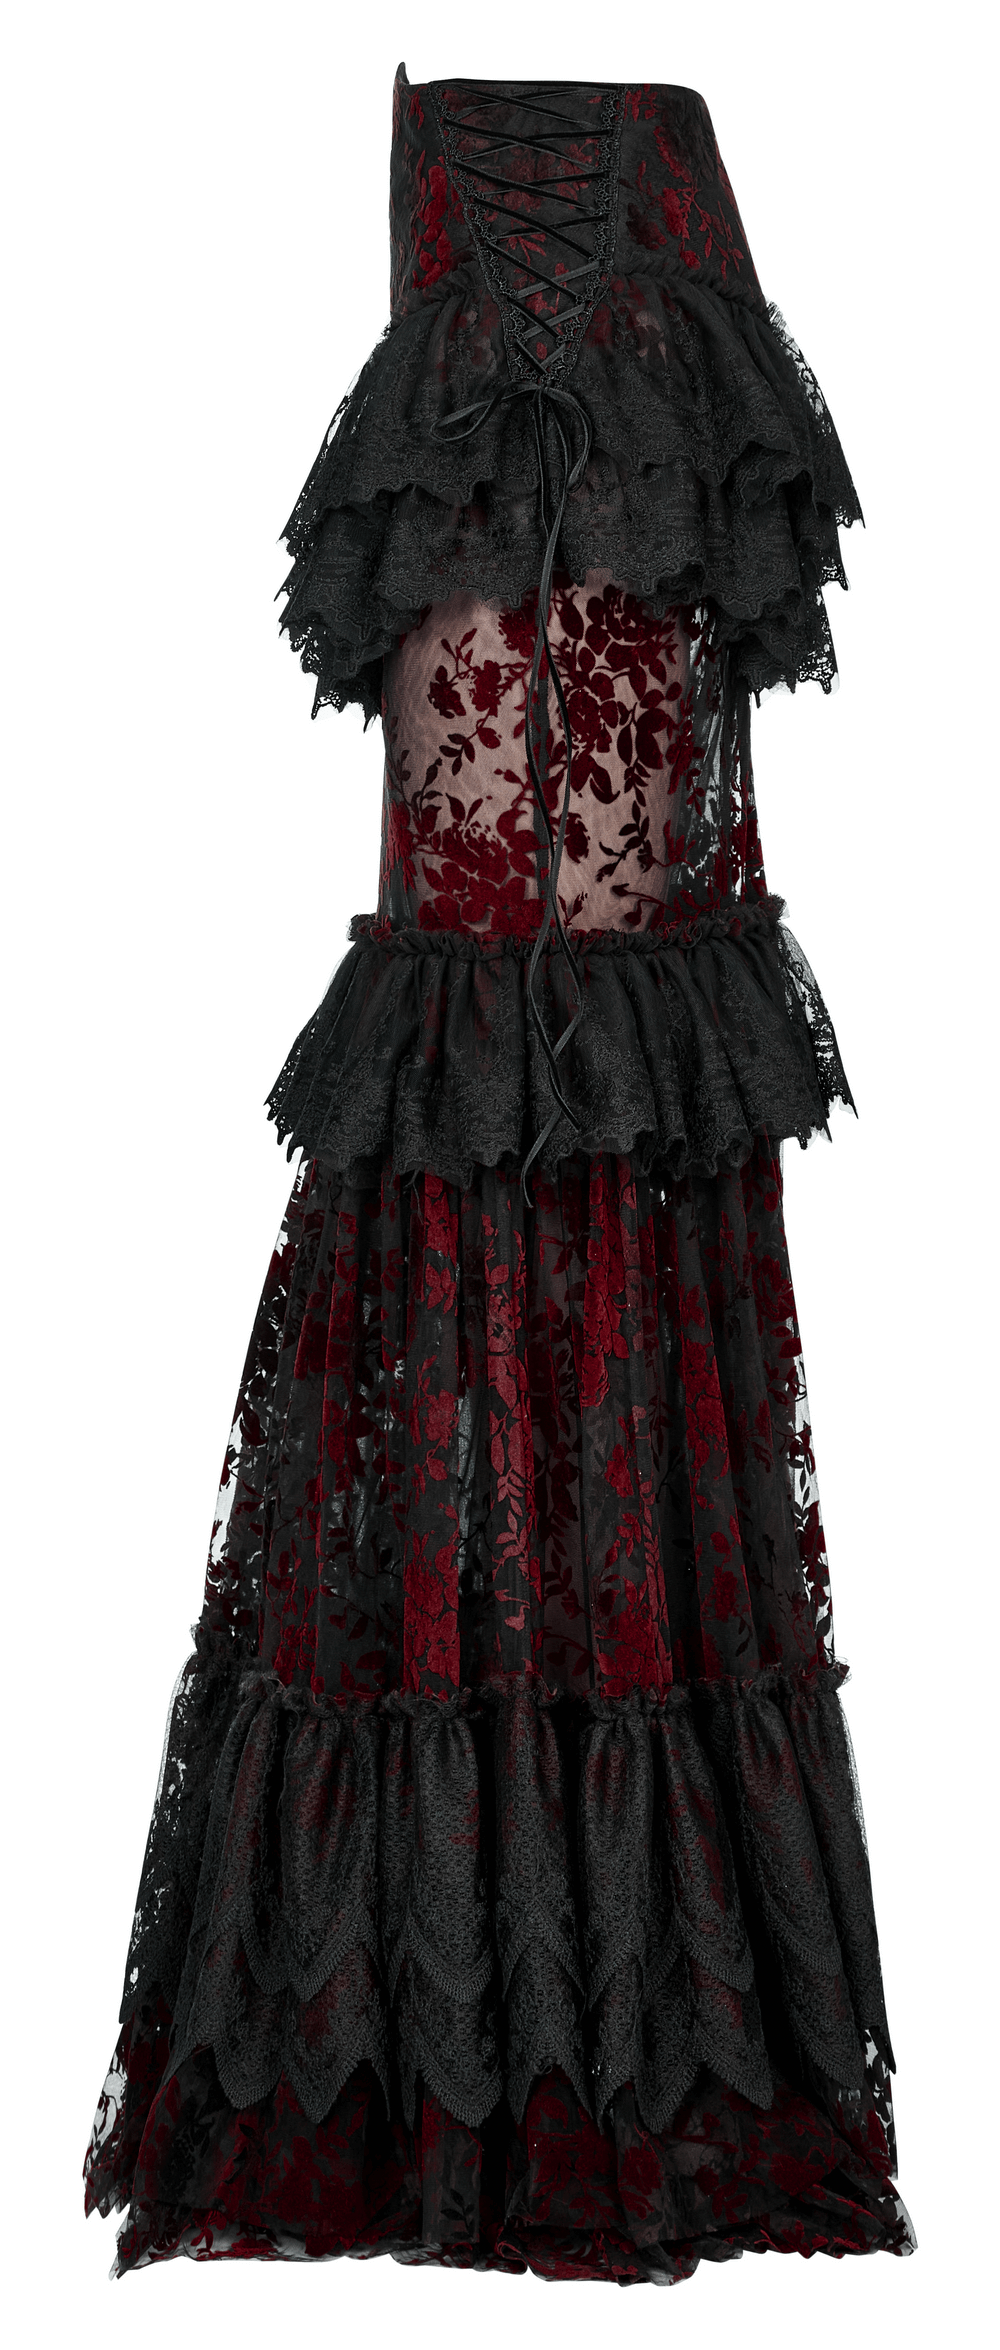 Floral Gothic Layered Lace Fishtail Skirt for Women - HARD'N'HEAVY